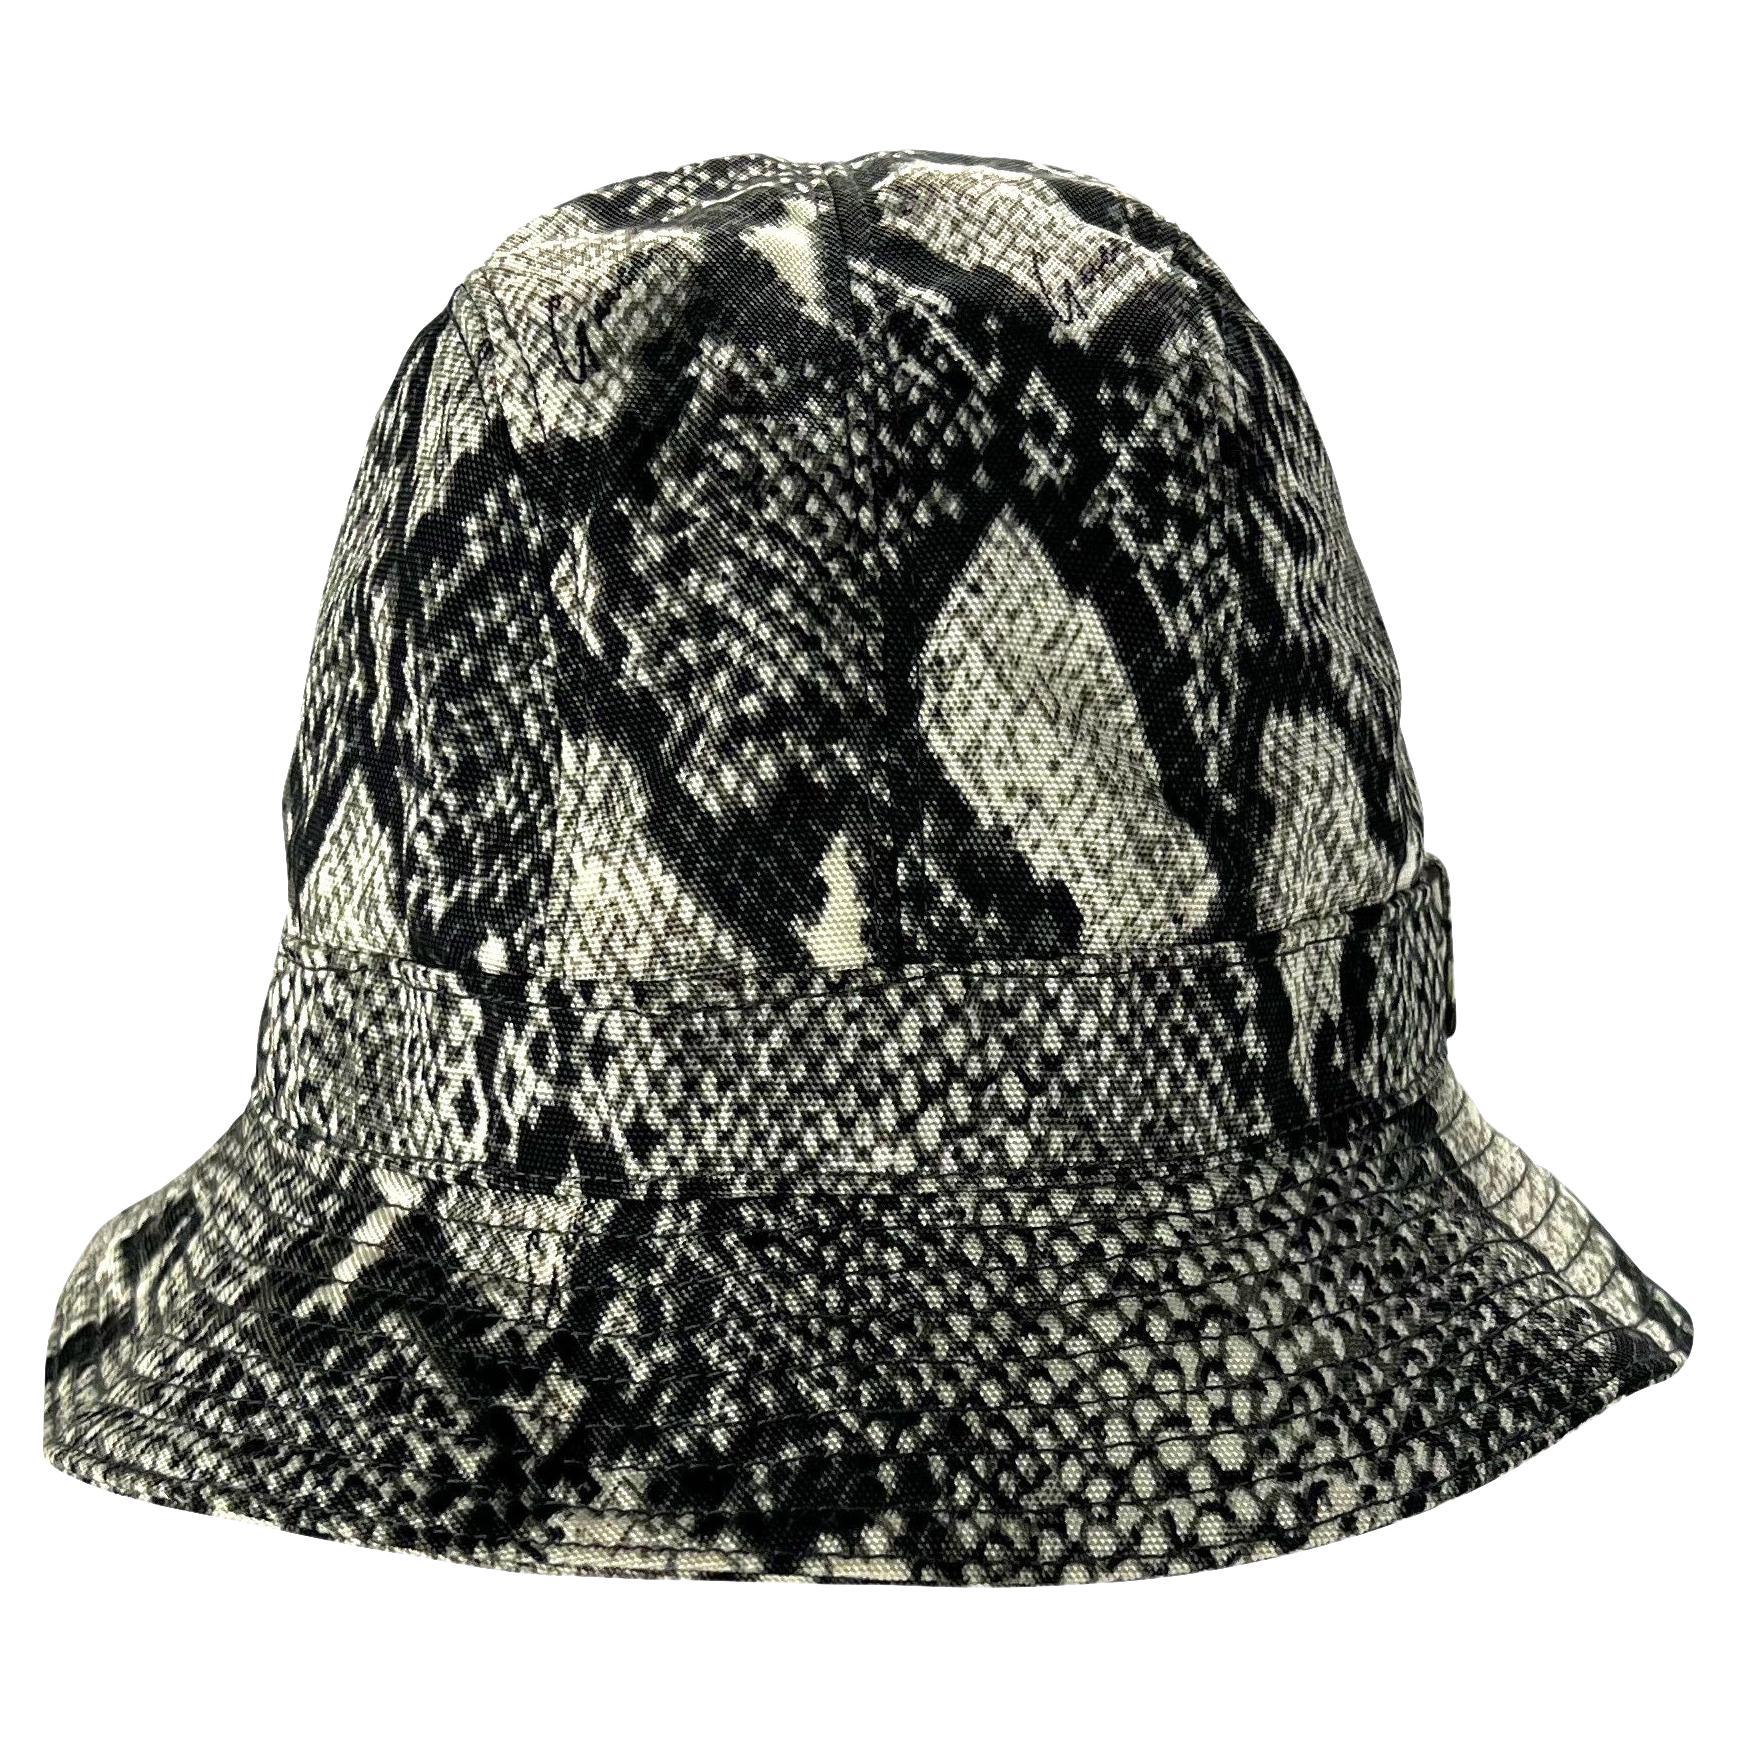 Women's S/S 2000 Gucci by Tom Ford Snakeskin Print Grey Nylon Bucket Hat For Sale